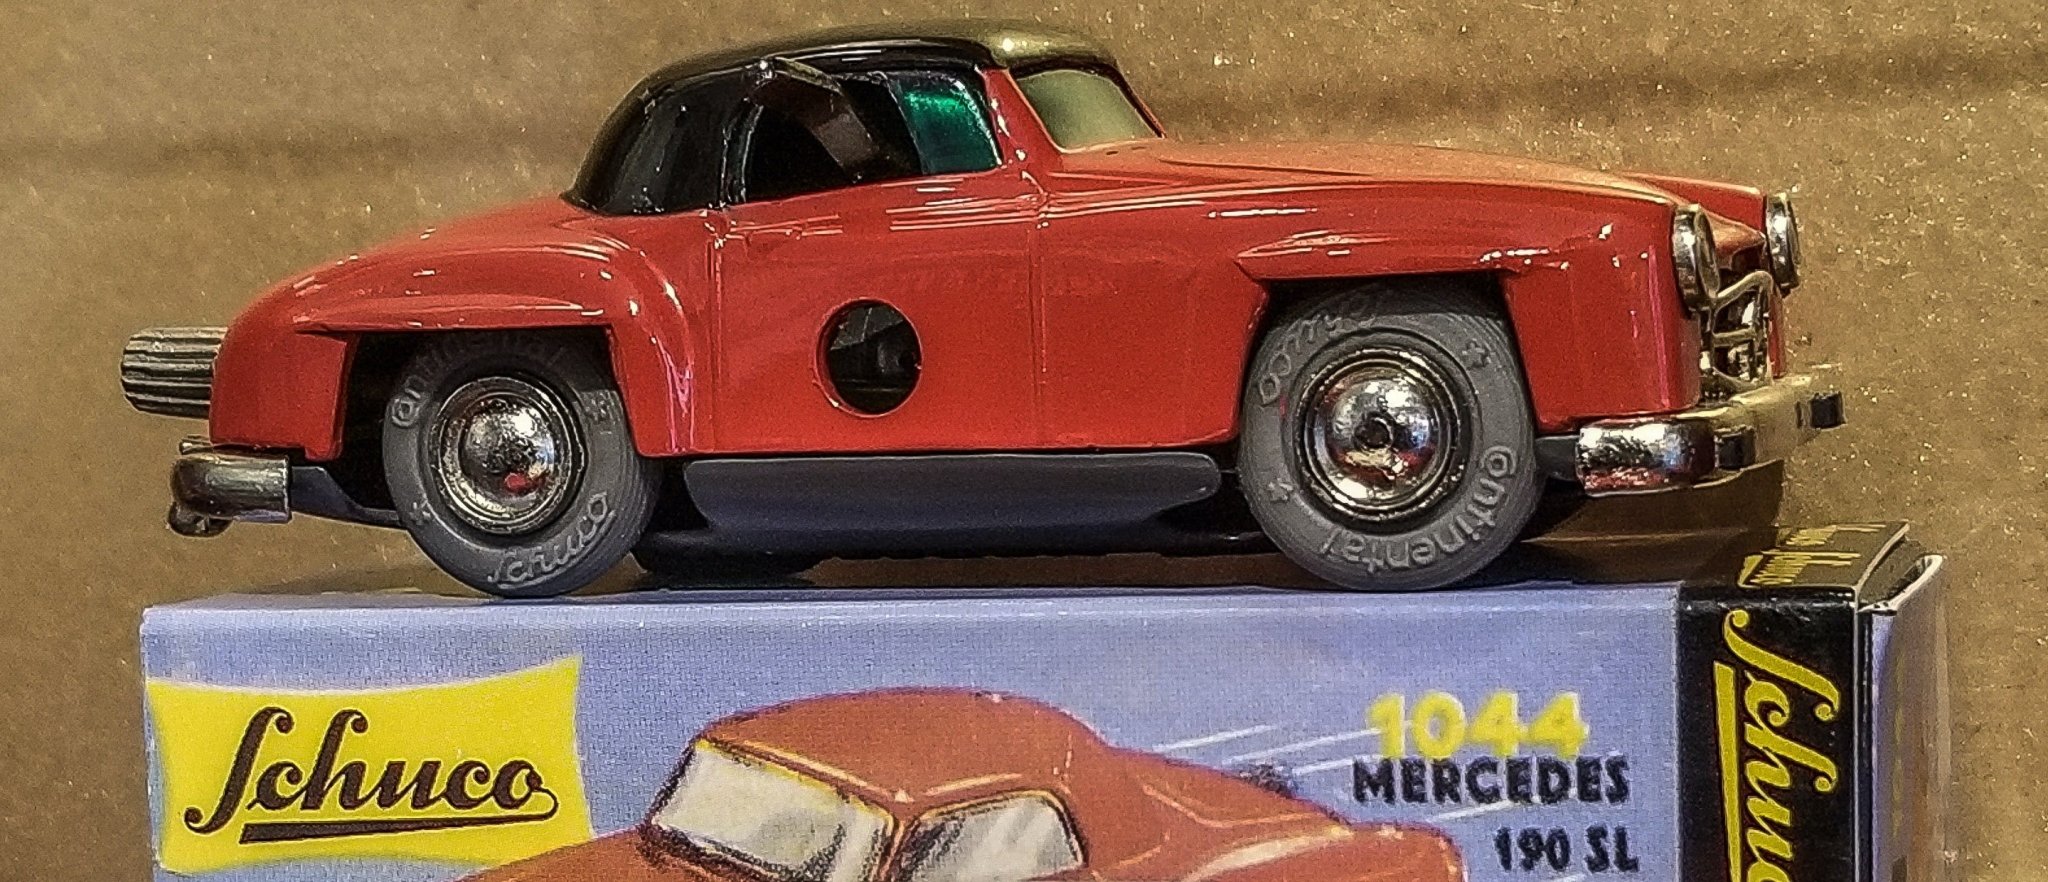 Diecast Cars: A Collector's Favorite